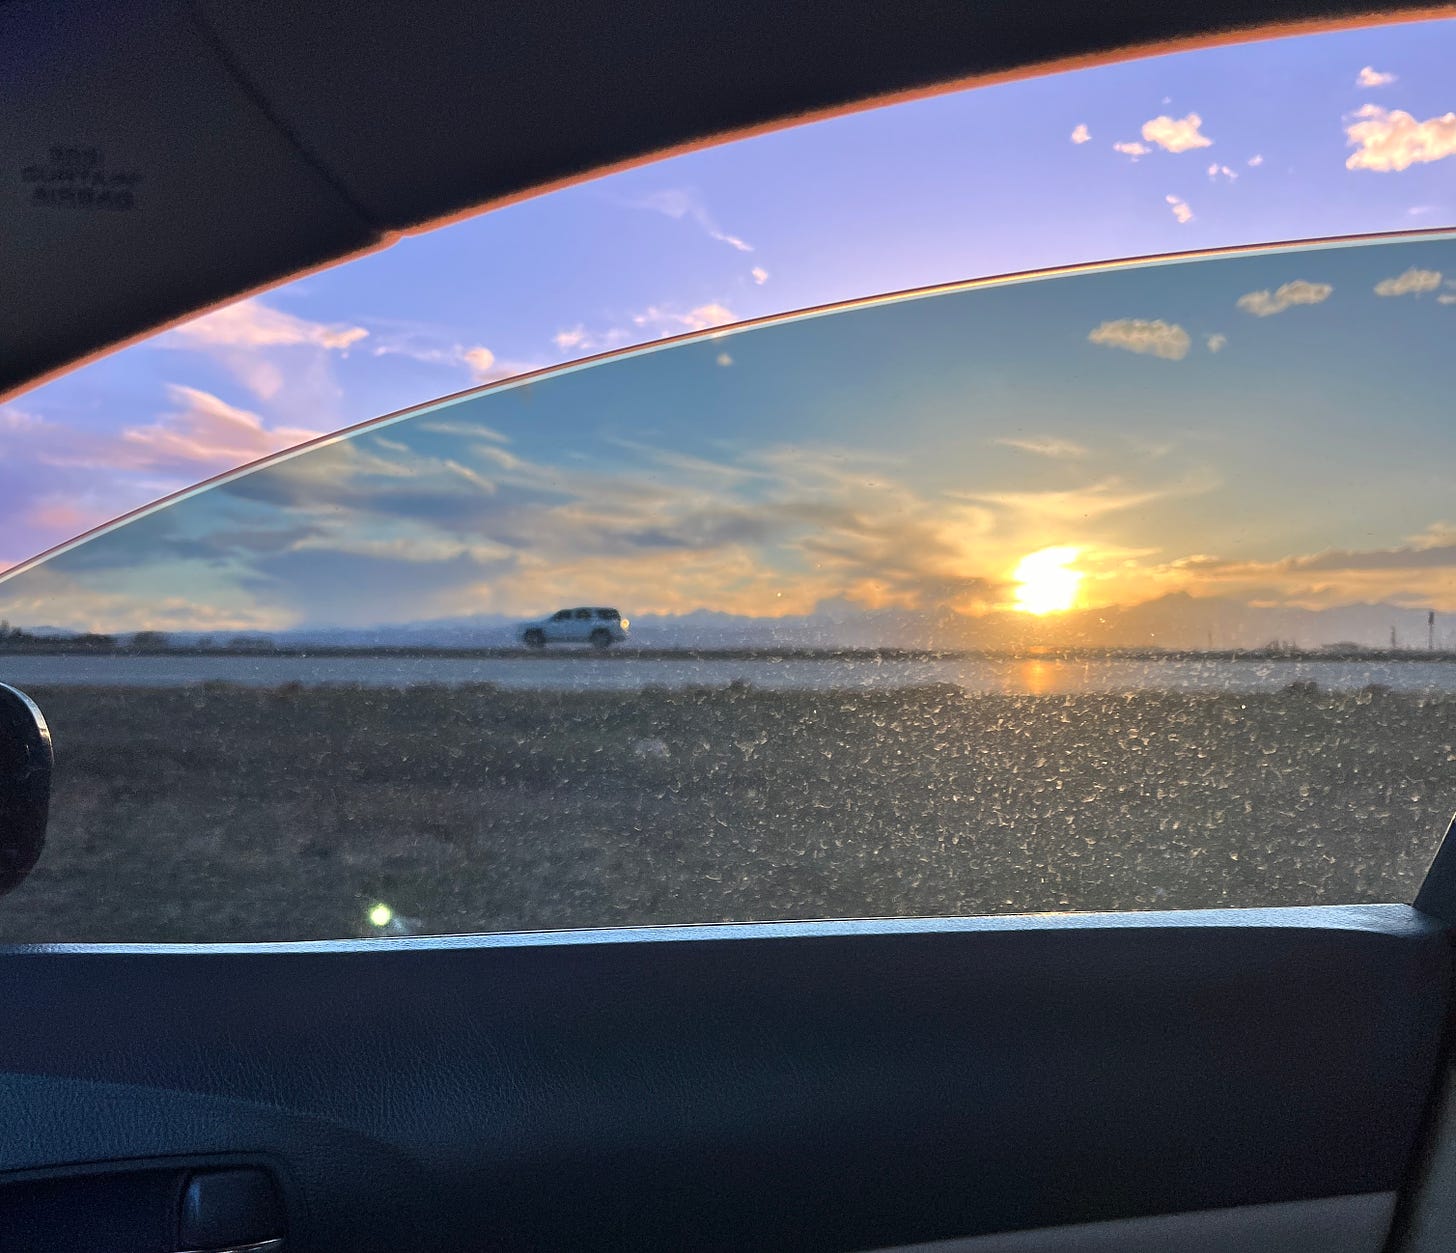 photo looking out of a car window shows the sun settings over the mountains with clouds in the sky and a white SUV driving in the same direction